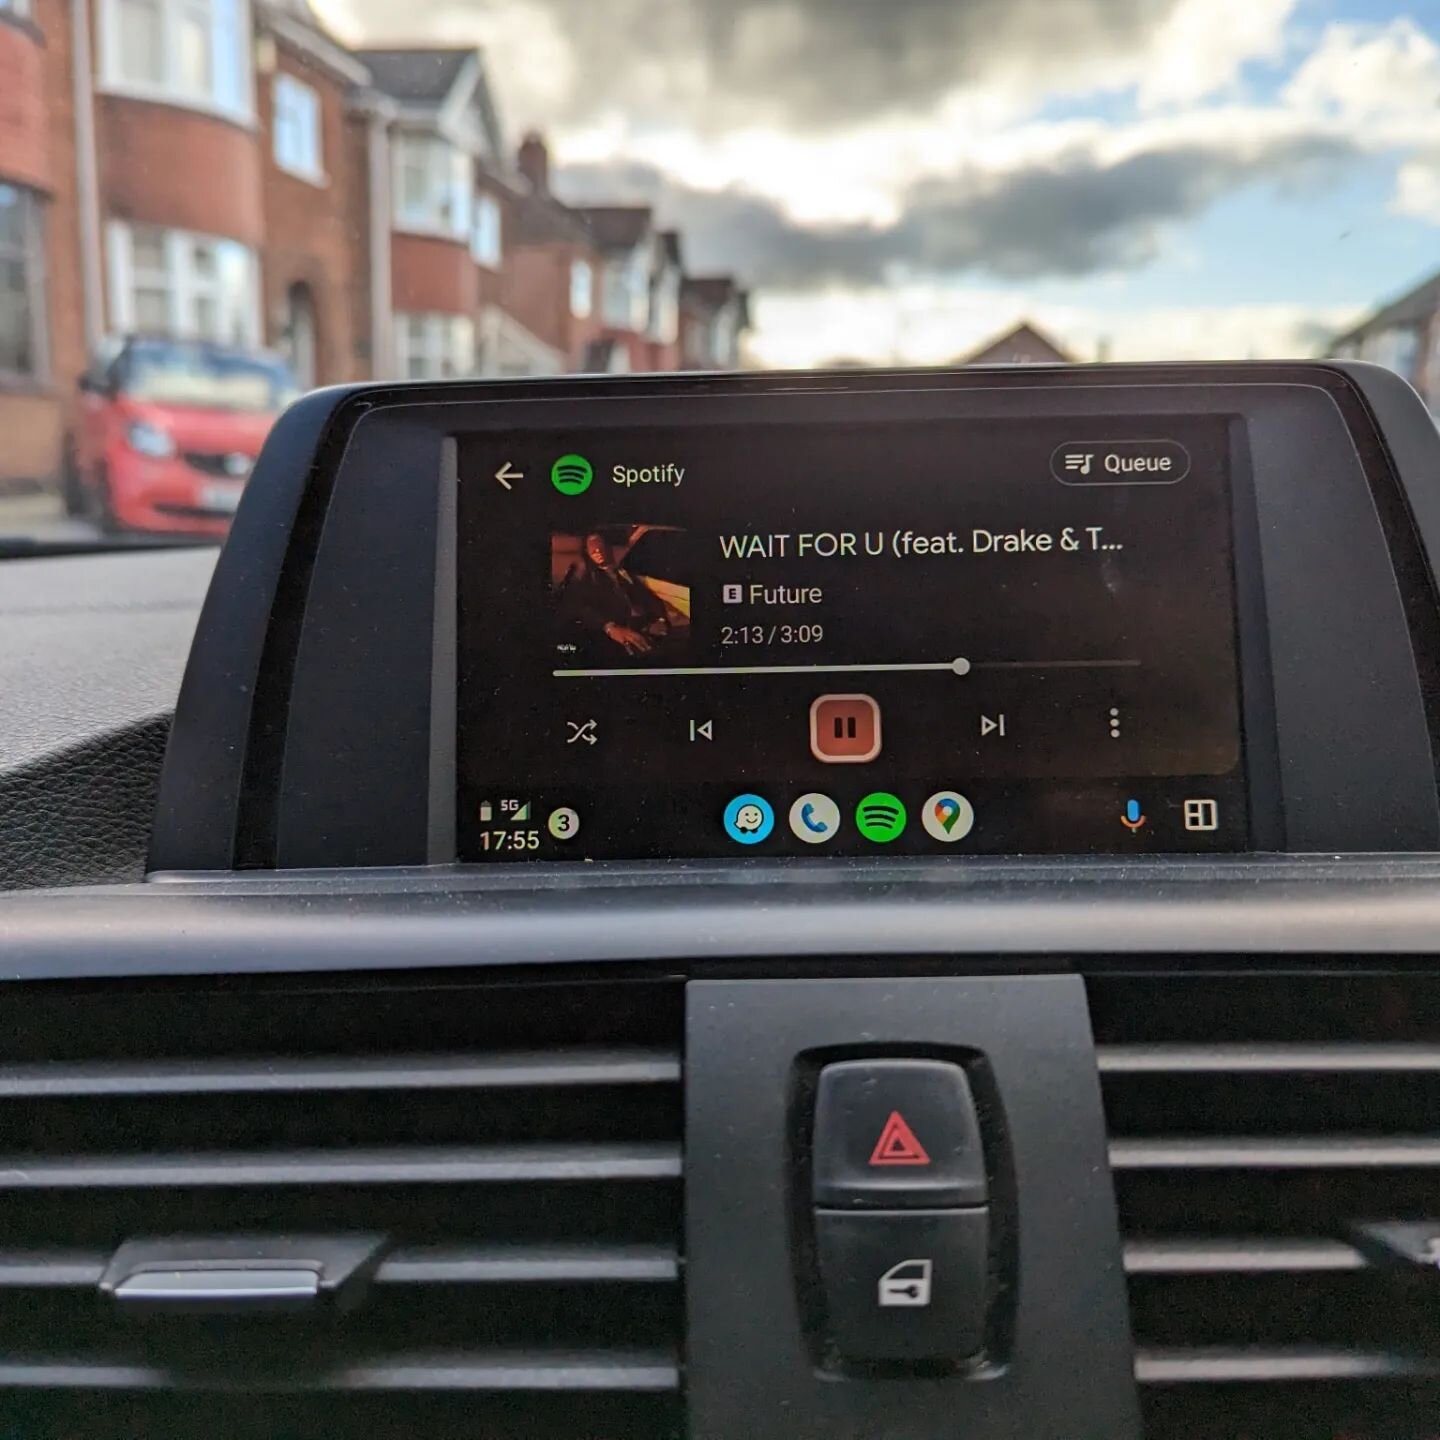 BMW F20 in for an MMI Interface giving Apple Carplay and Android Auto

Apple Carplay 🍎
Android Auto 📱
Reverse Camera 📷
Screen Mirroring 🖥️
Video Playback 🎦
USB Media ▶️

#applecarplay #androidauto #caraudio #caraudioleicester #leicestercarscene 